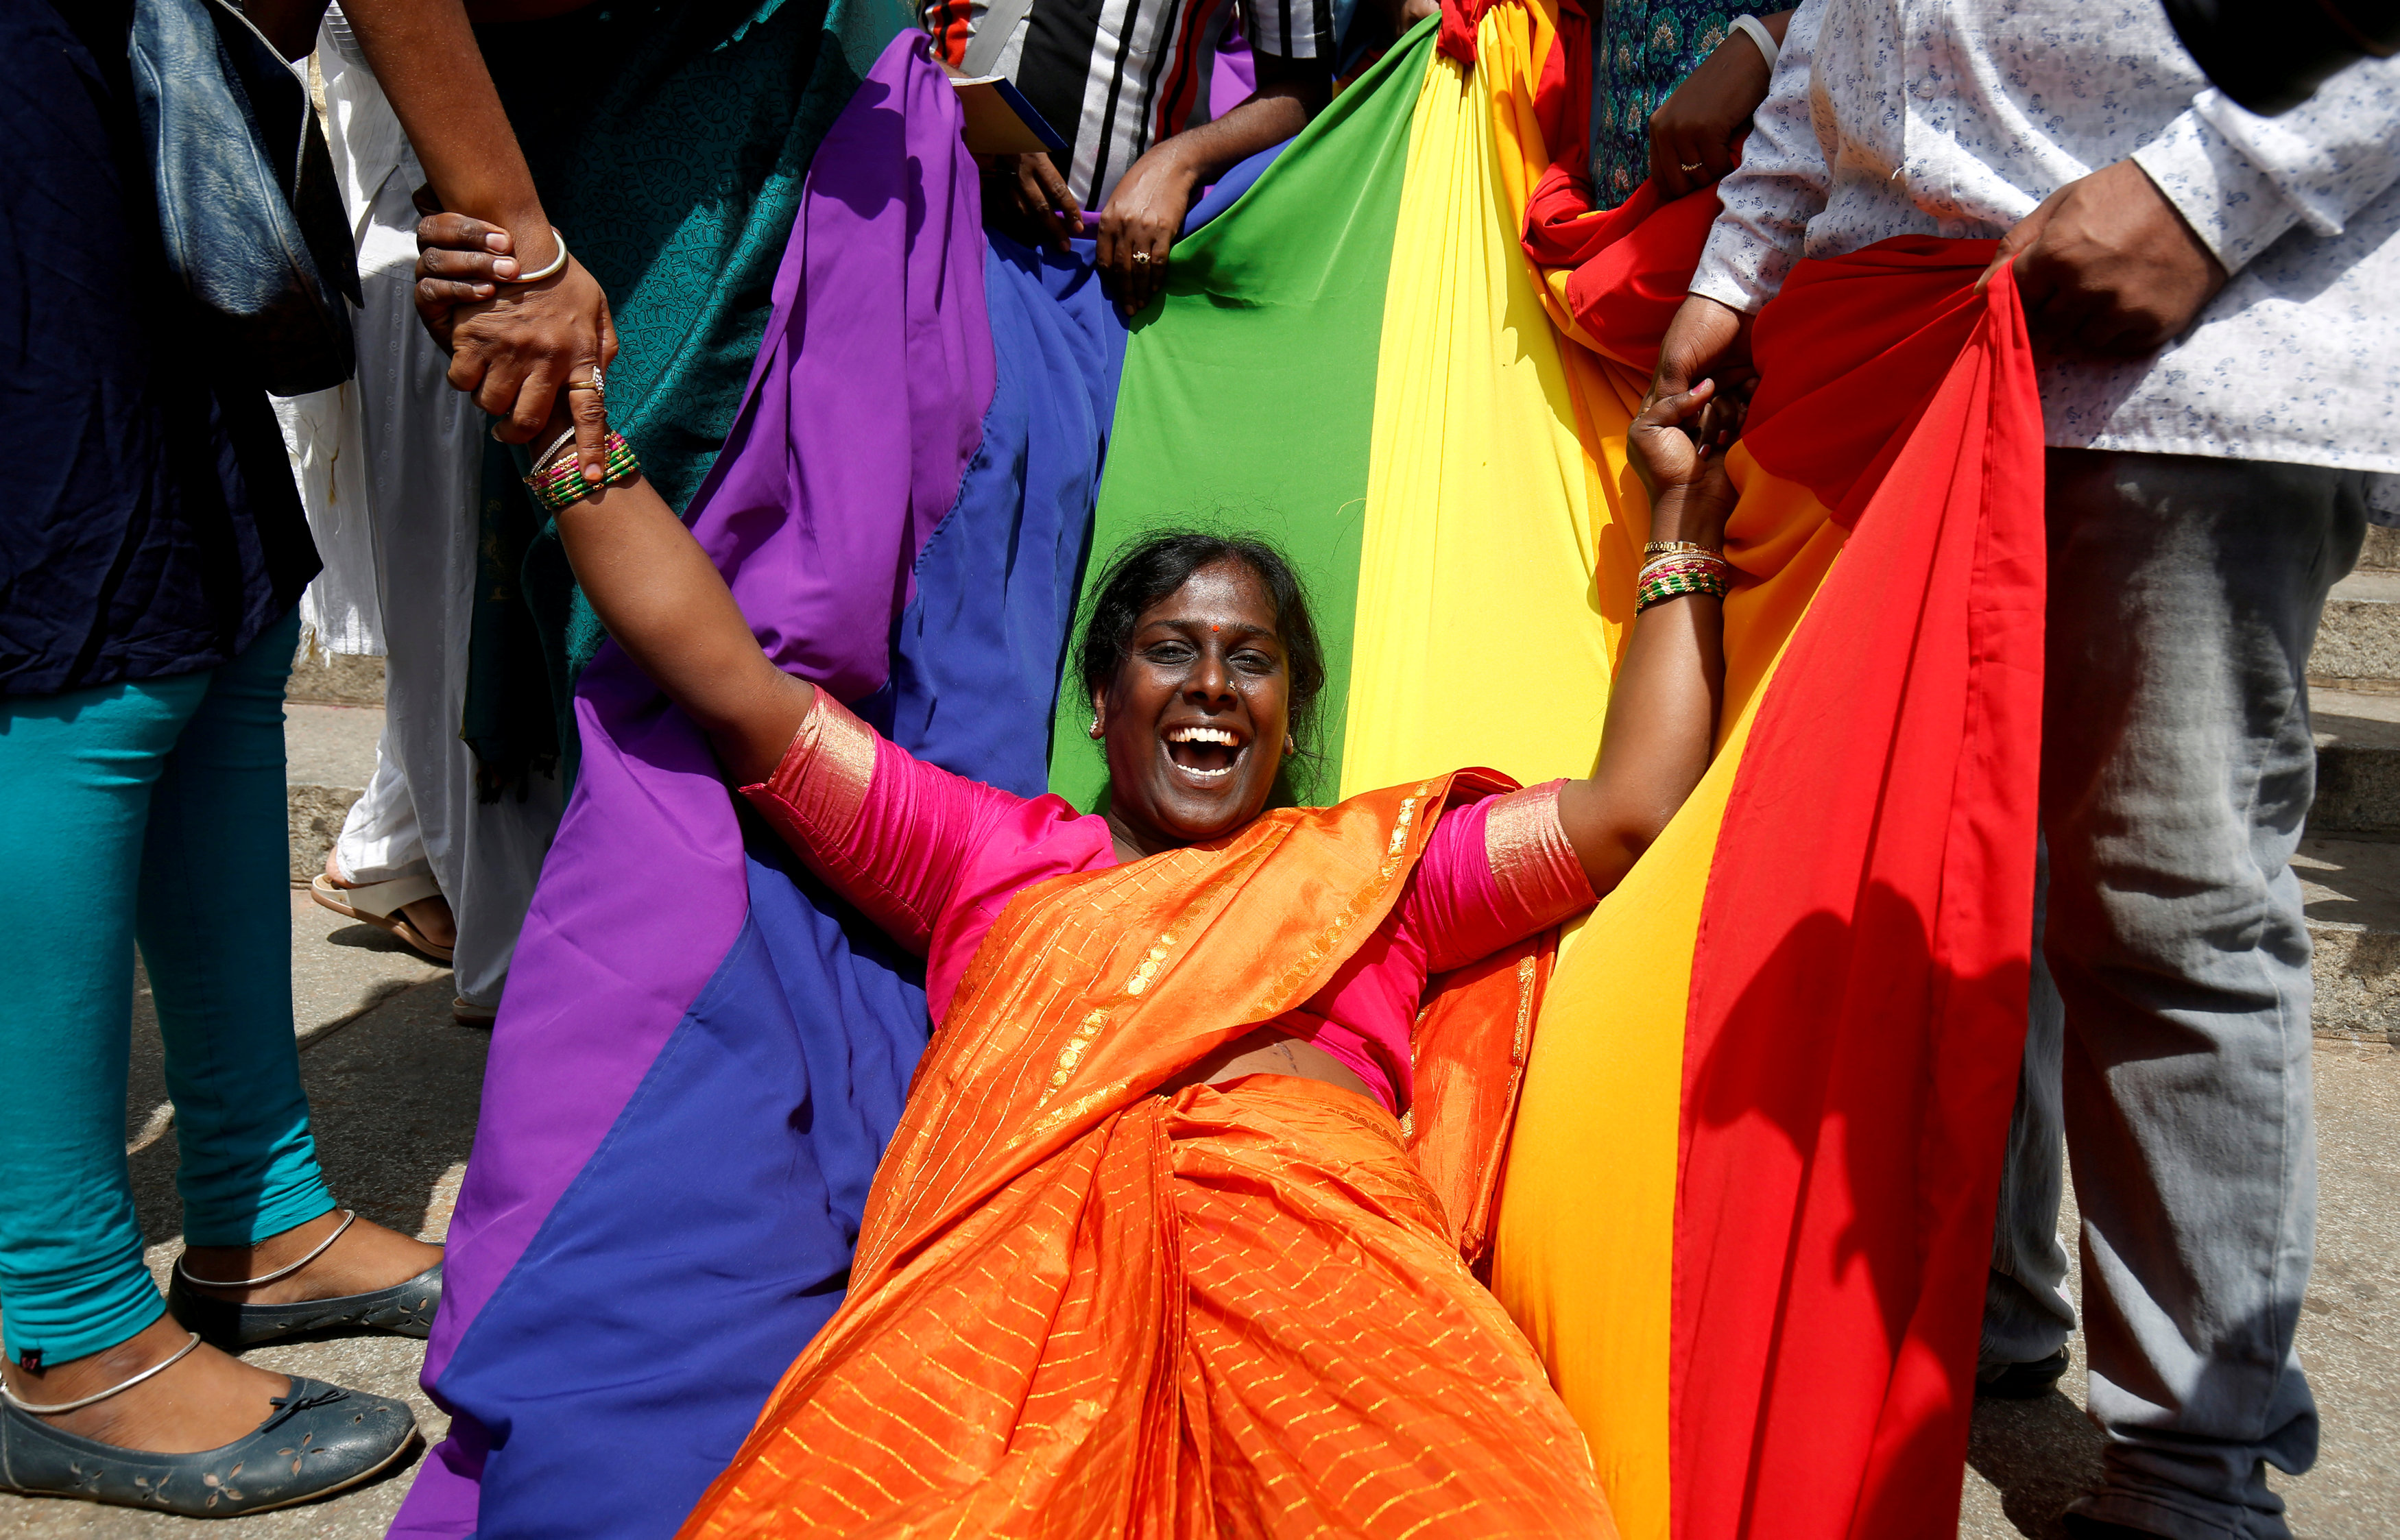 Indian church displeased with ruling legalizing same-sex relationships